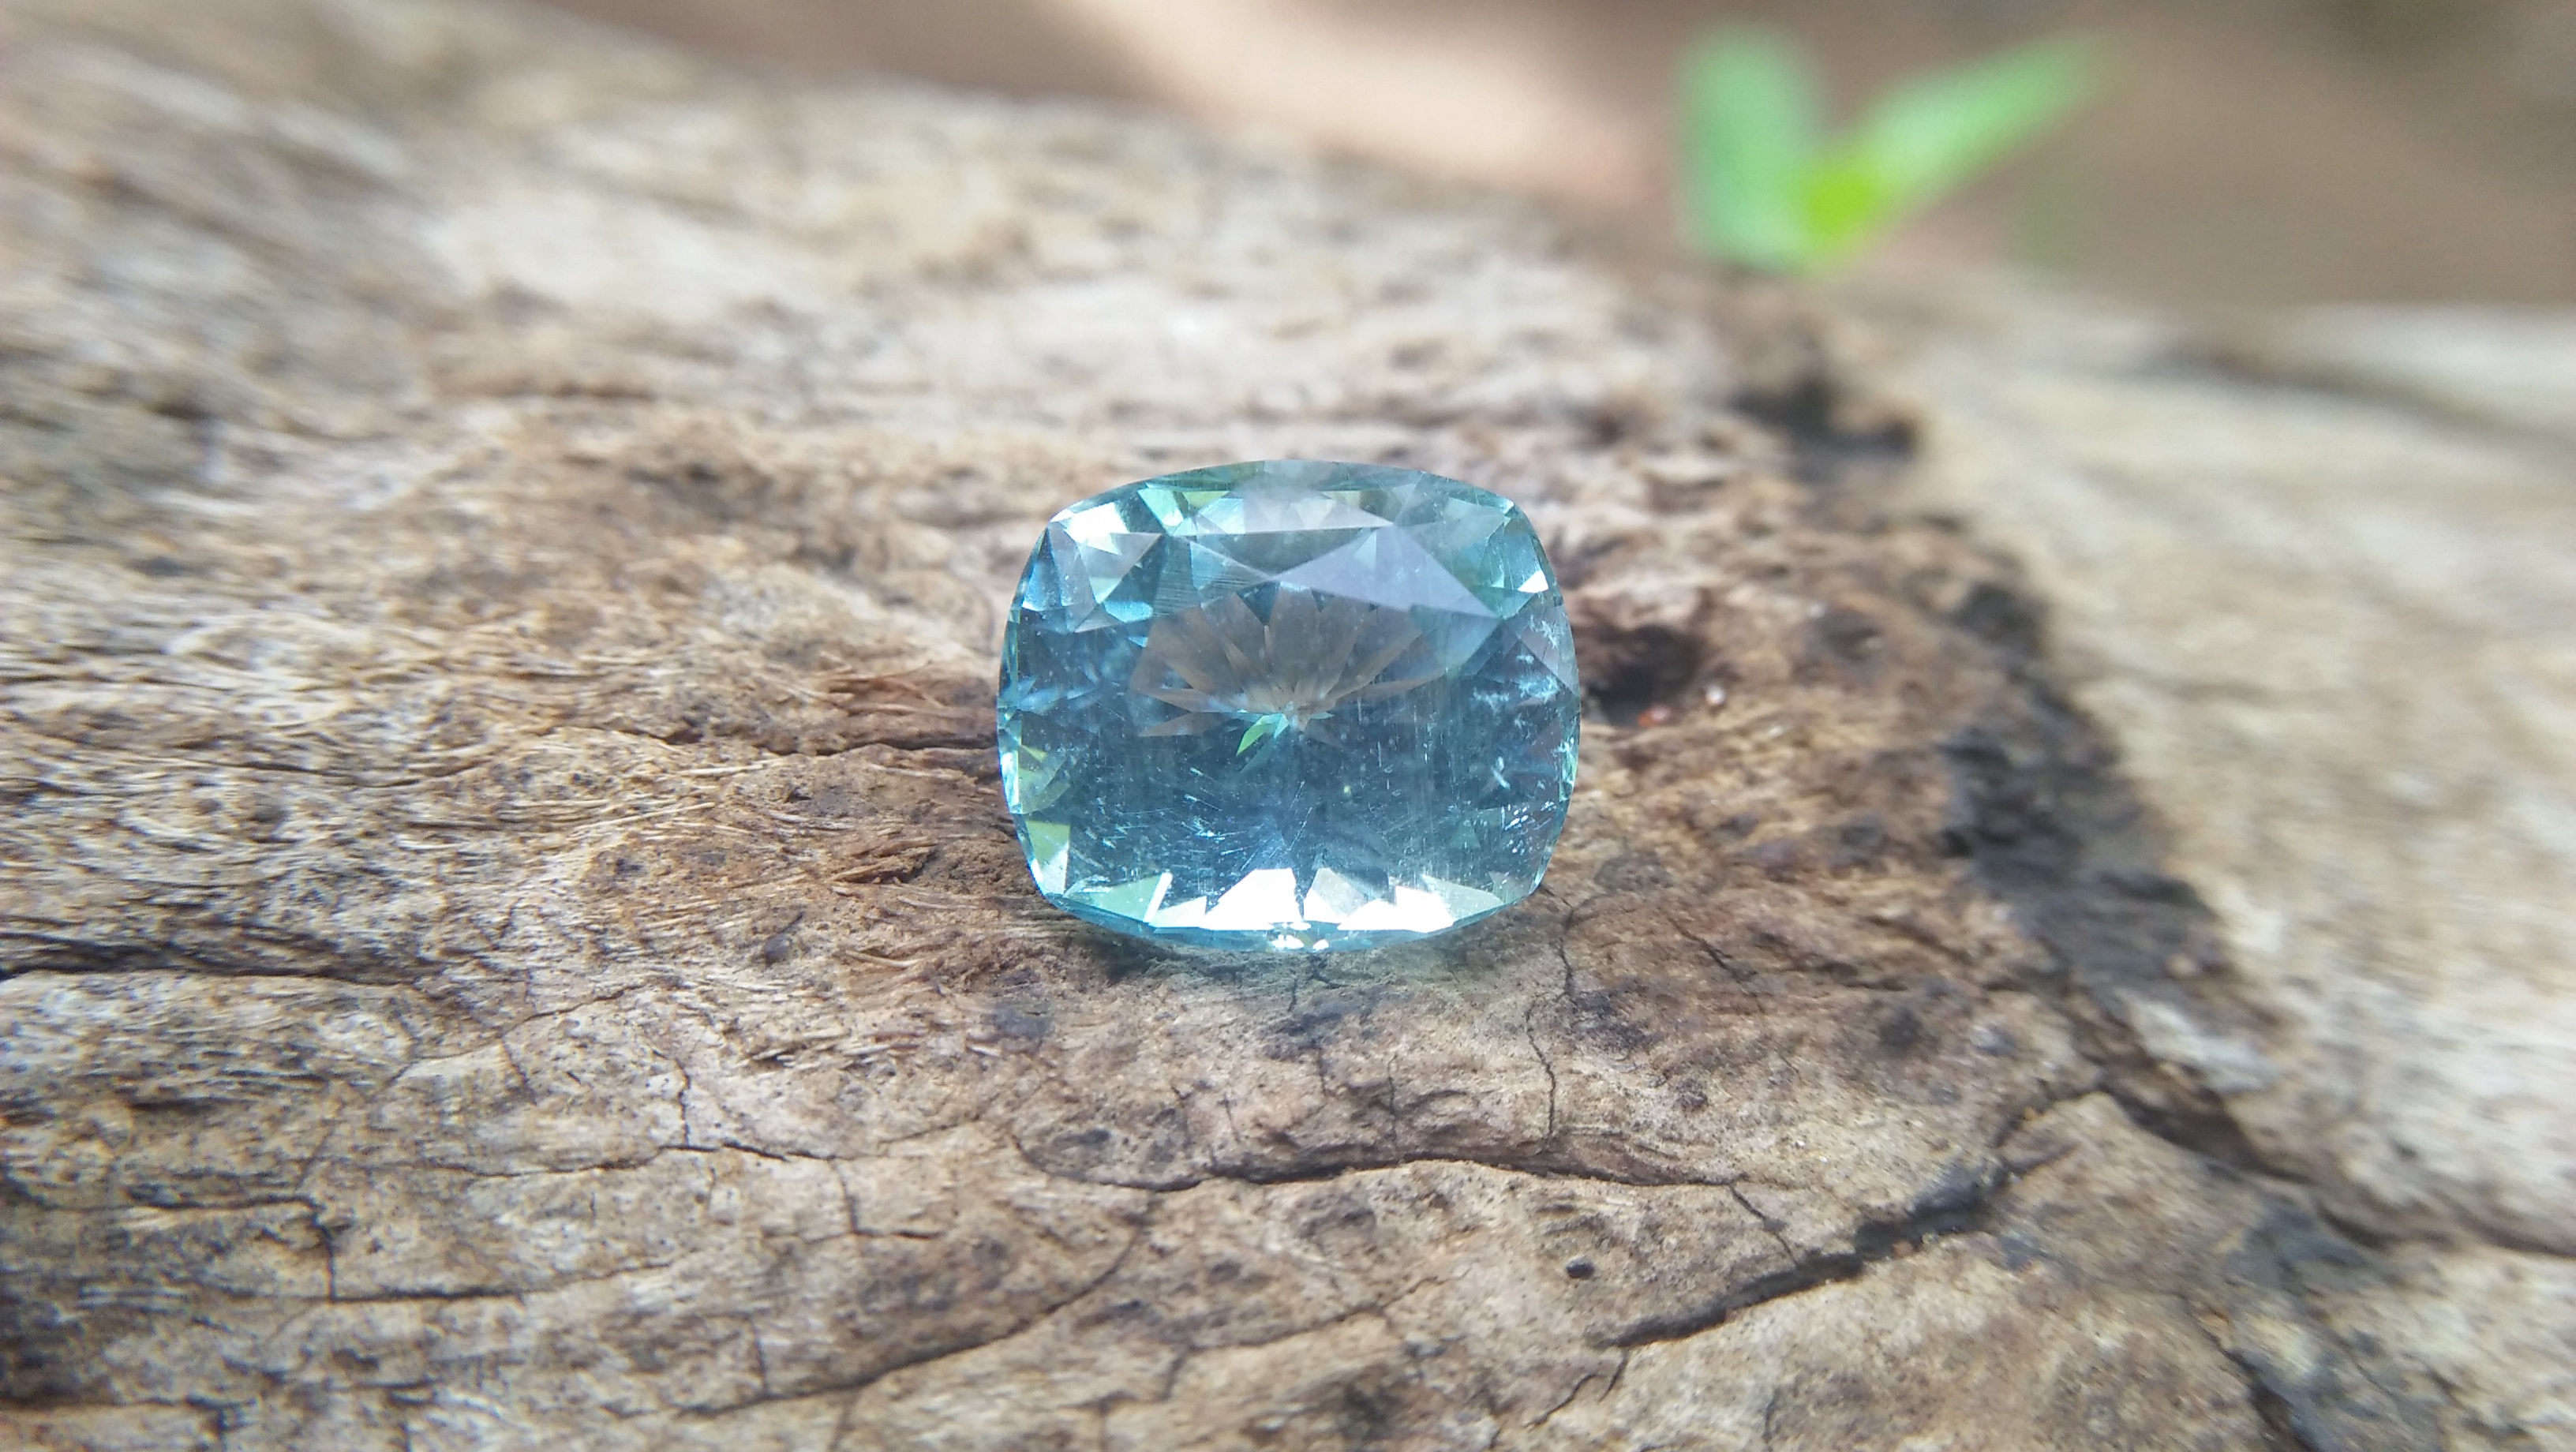 Aquamarine is a color variety of the mineral beryl. Beryl is a mineral composed of beryllium aluminium cyclosilicate with the chemical formula Be₃Al₂. Well-known varieties of beryl include emerald and aquamarine. Naturally occurring, hexagonal crystals of beryl can be up to several meters in size, but terminated crystals are relatively rare. Hardness : 7.5 – 8 Crystal system : Hexagonal Specific gravity : Average 2.76 Optical properties : Uniaxial (-) Refractive index : nω = 1.564–1.595 nε = 1.568–1.602 Healings of Aquamarine, Aquamarine Heals emotional trauma, Cools high temper and conflict, Relieves stress, helps get in touch with suppressed emotions, Brings peace, Clears the mind, Calms the heart and many healing in this stone